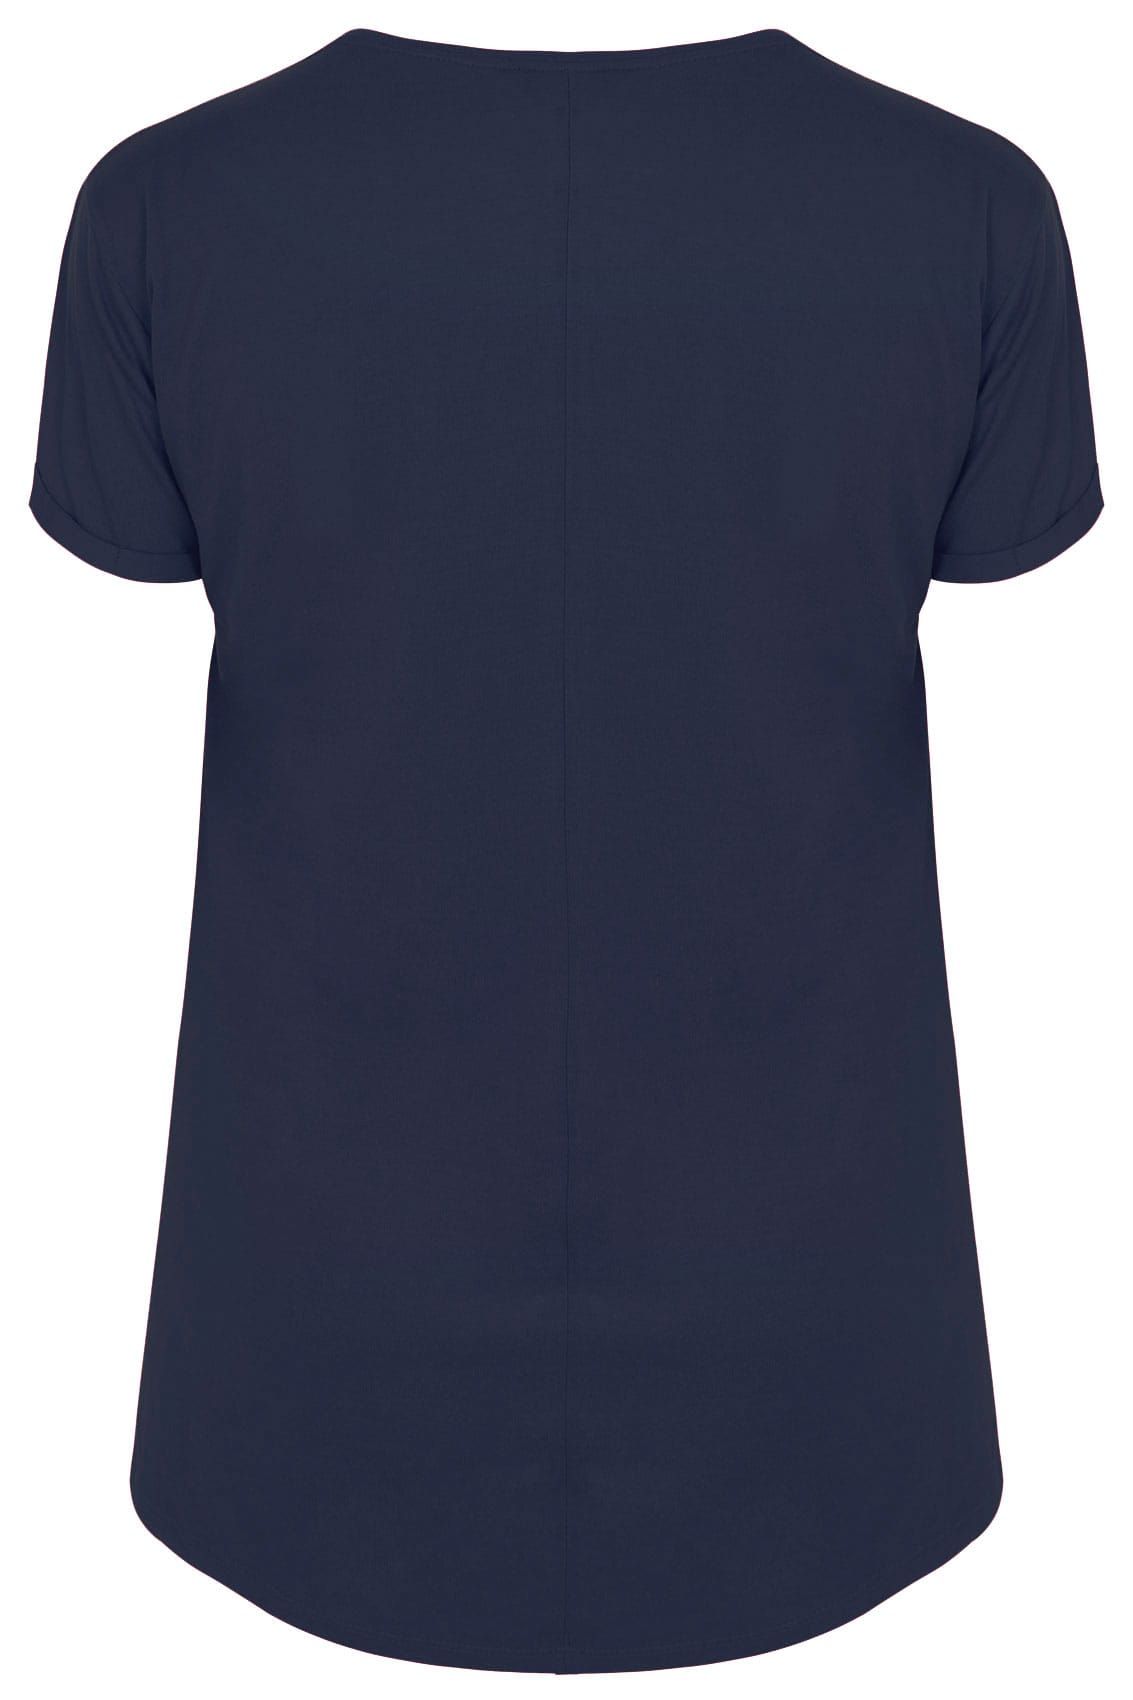 Download Navy Pocket T-Shirt With Curved Hem, Plus size 14 to 36